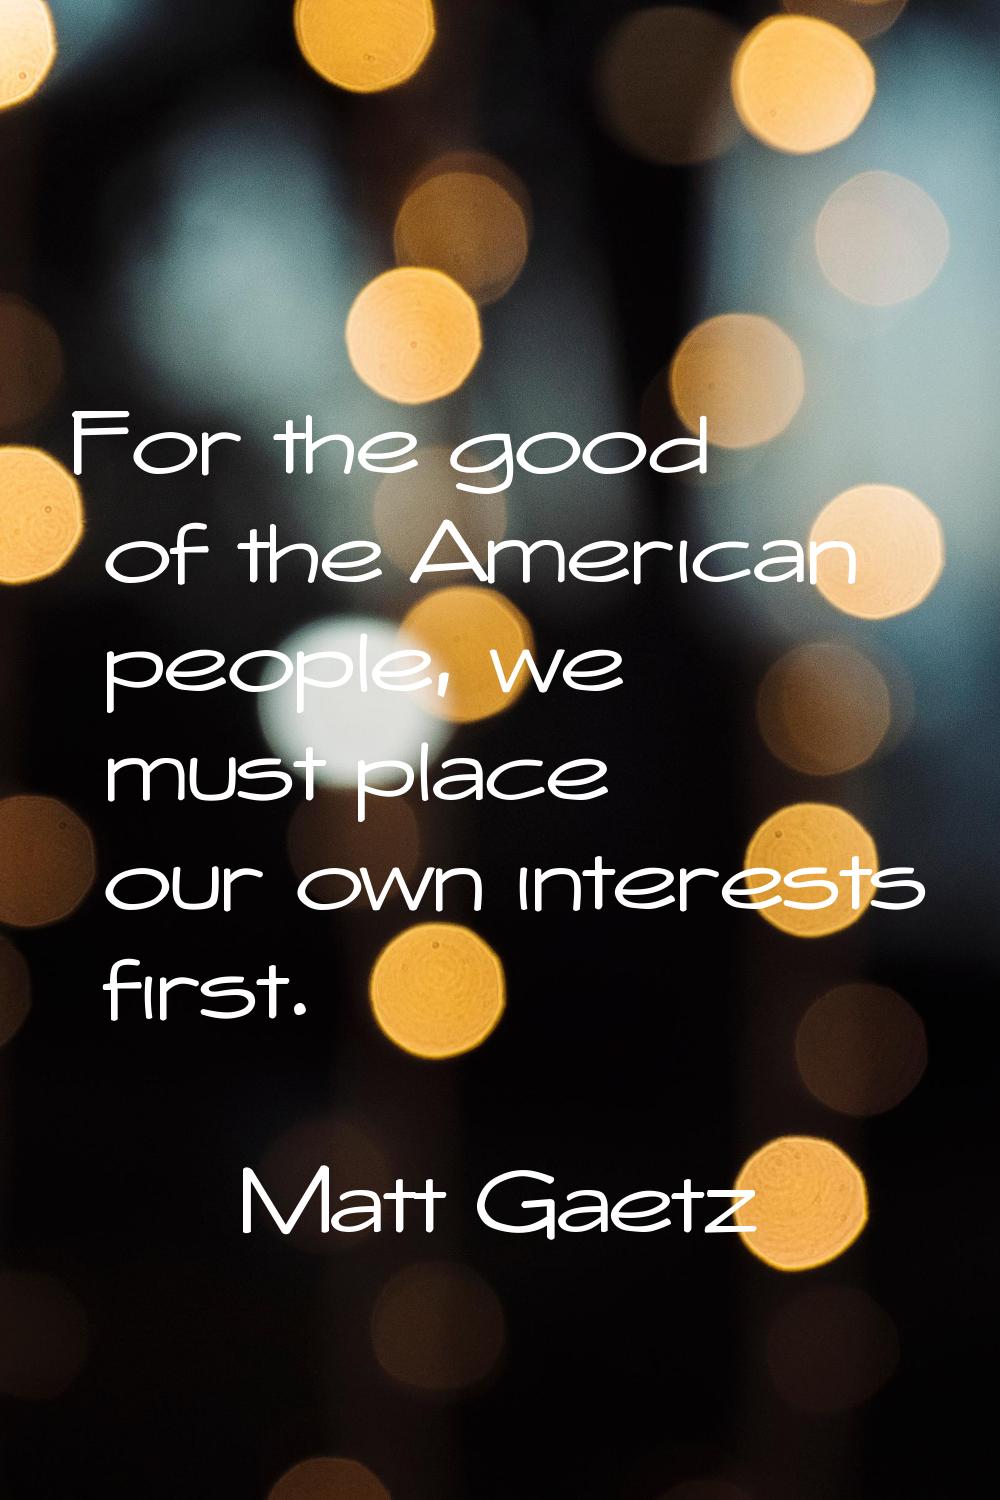 For the good of the American people, we must place our own interests first.